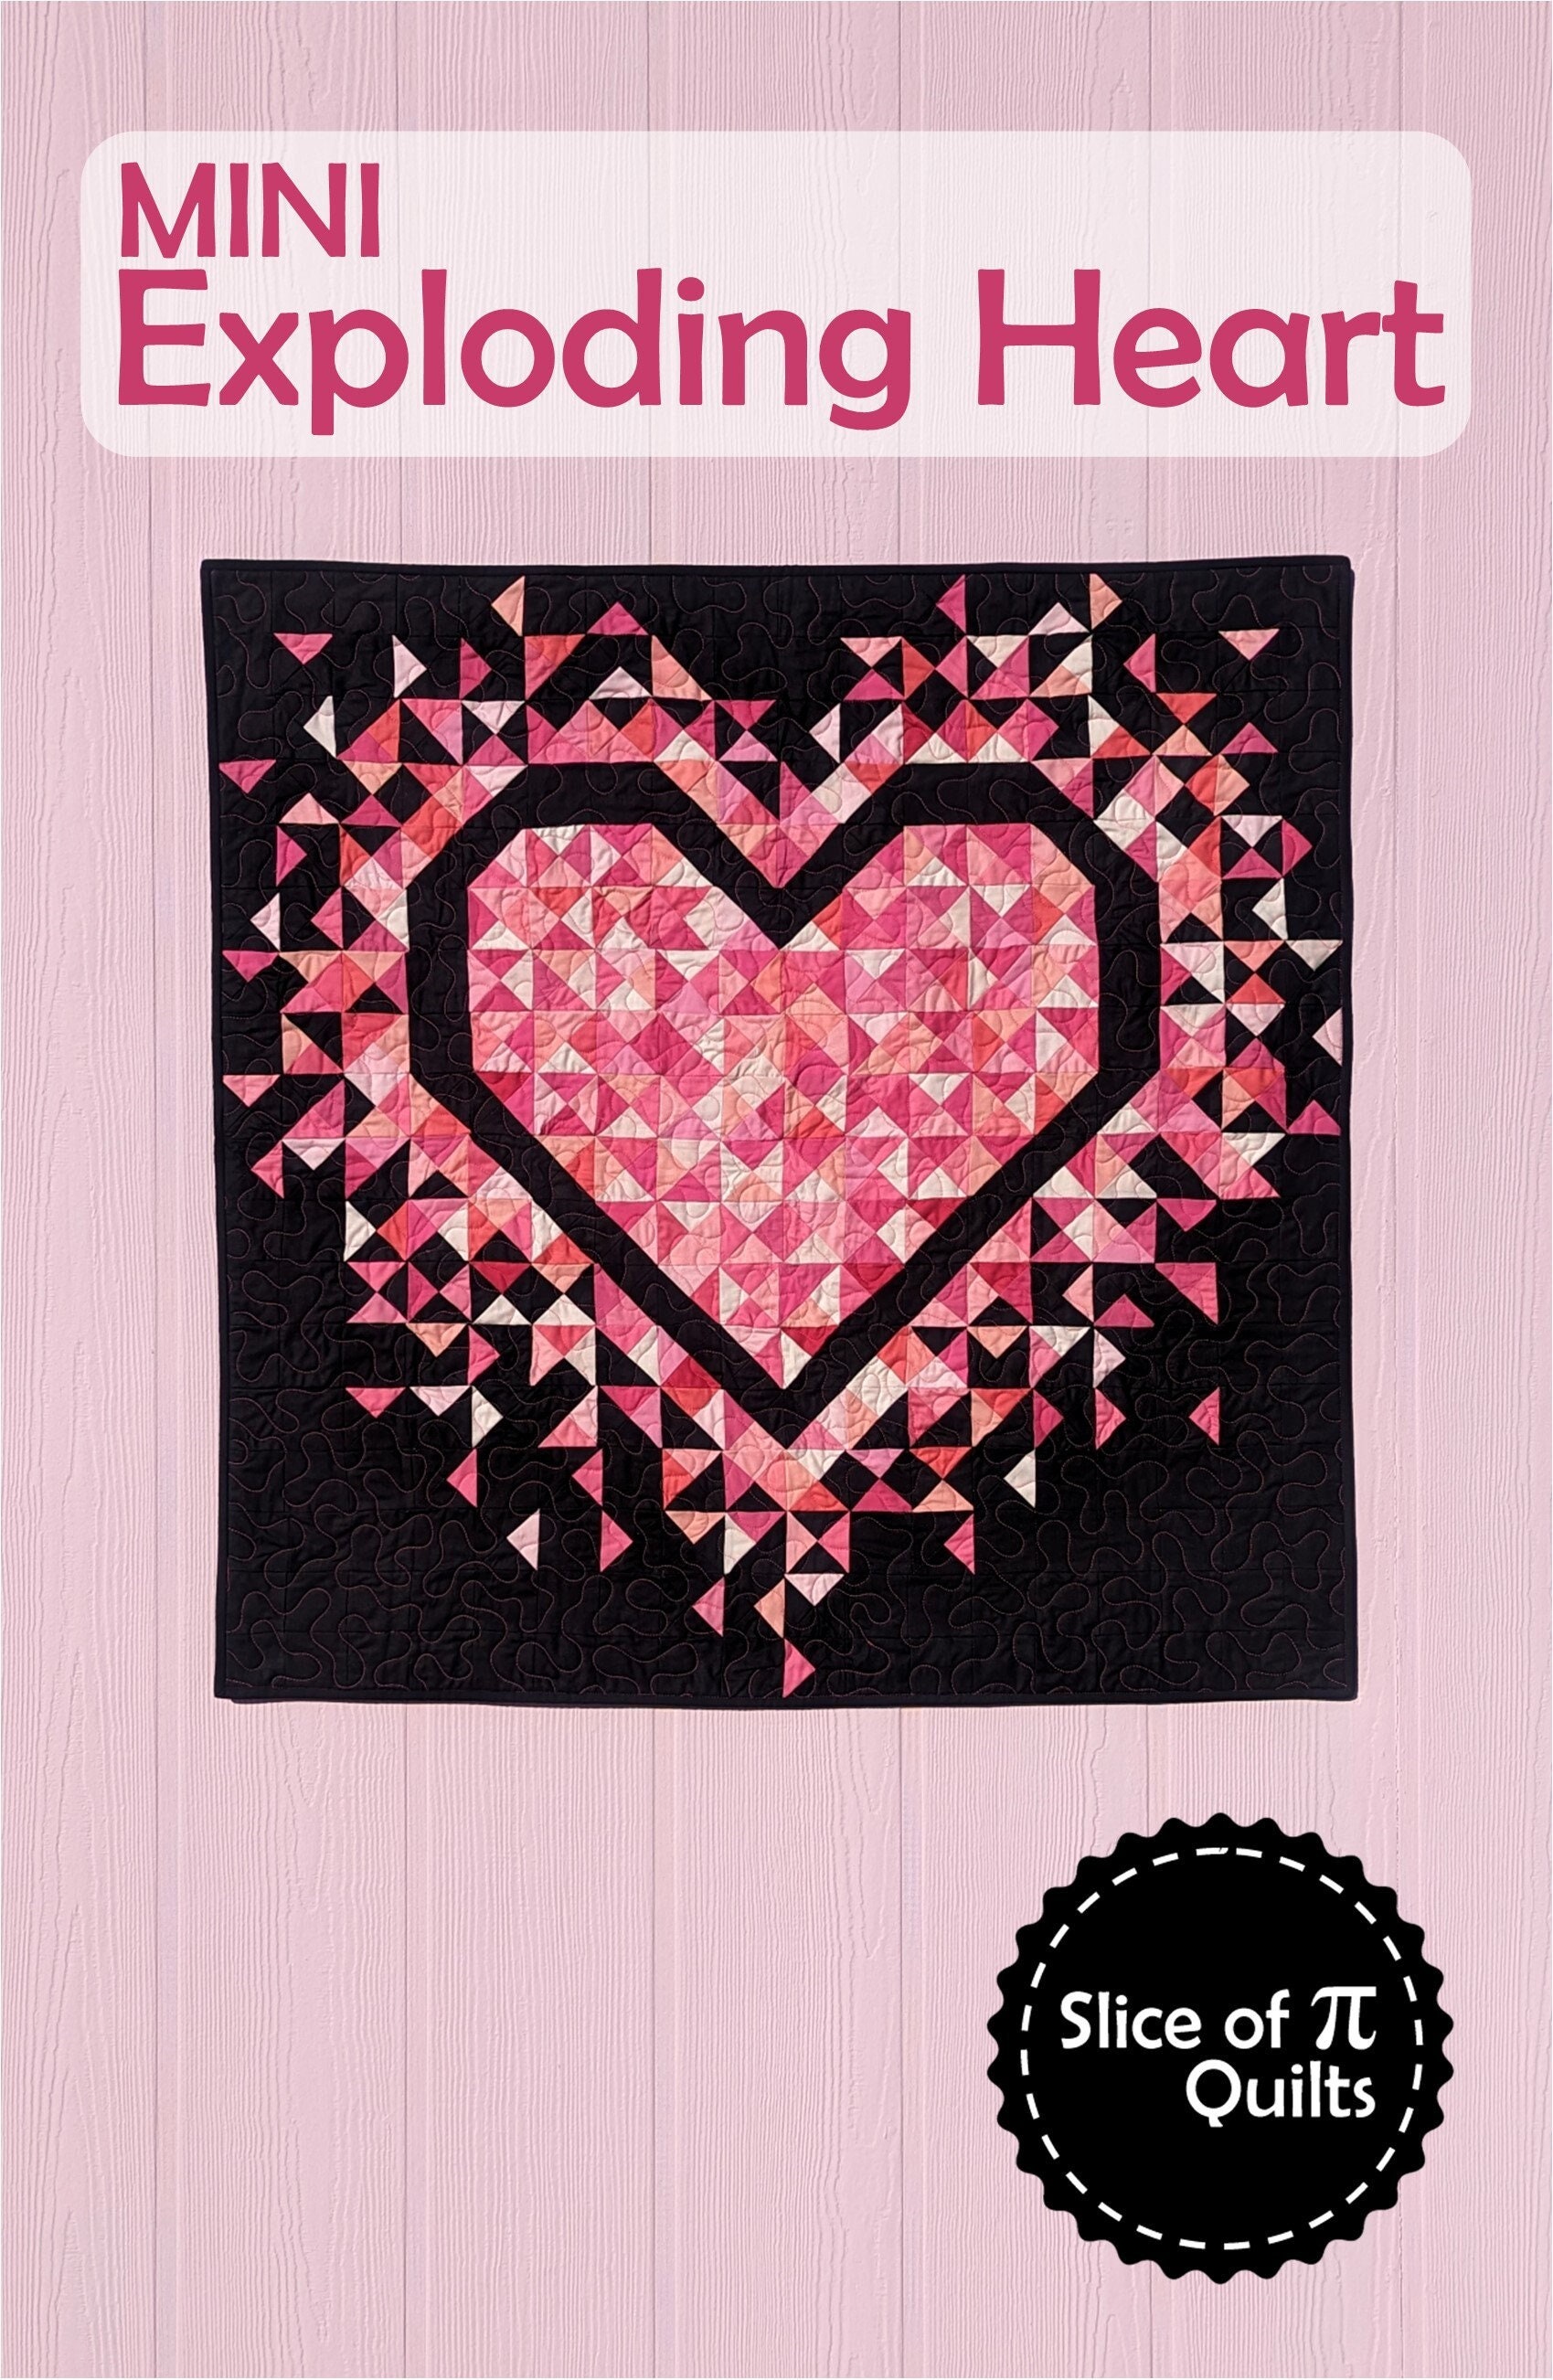 Gnomie Love Advanced Beginner Valentine Fabric QUILT KIT with Henry Gl –  Angels Neverland